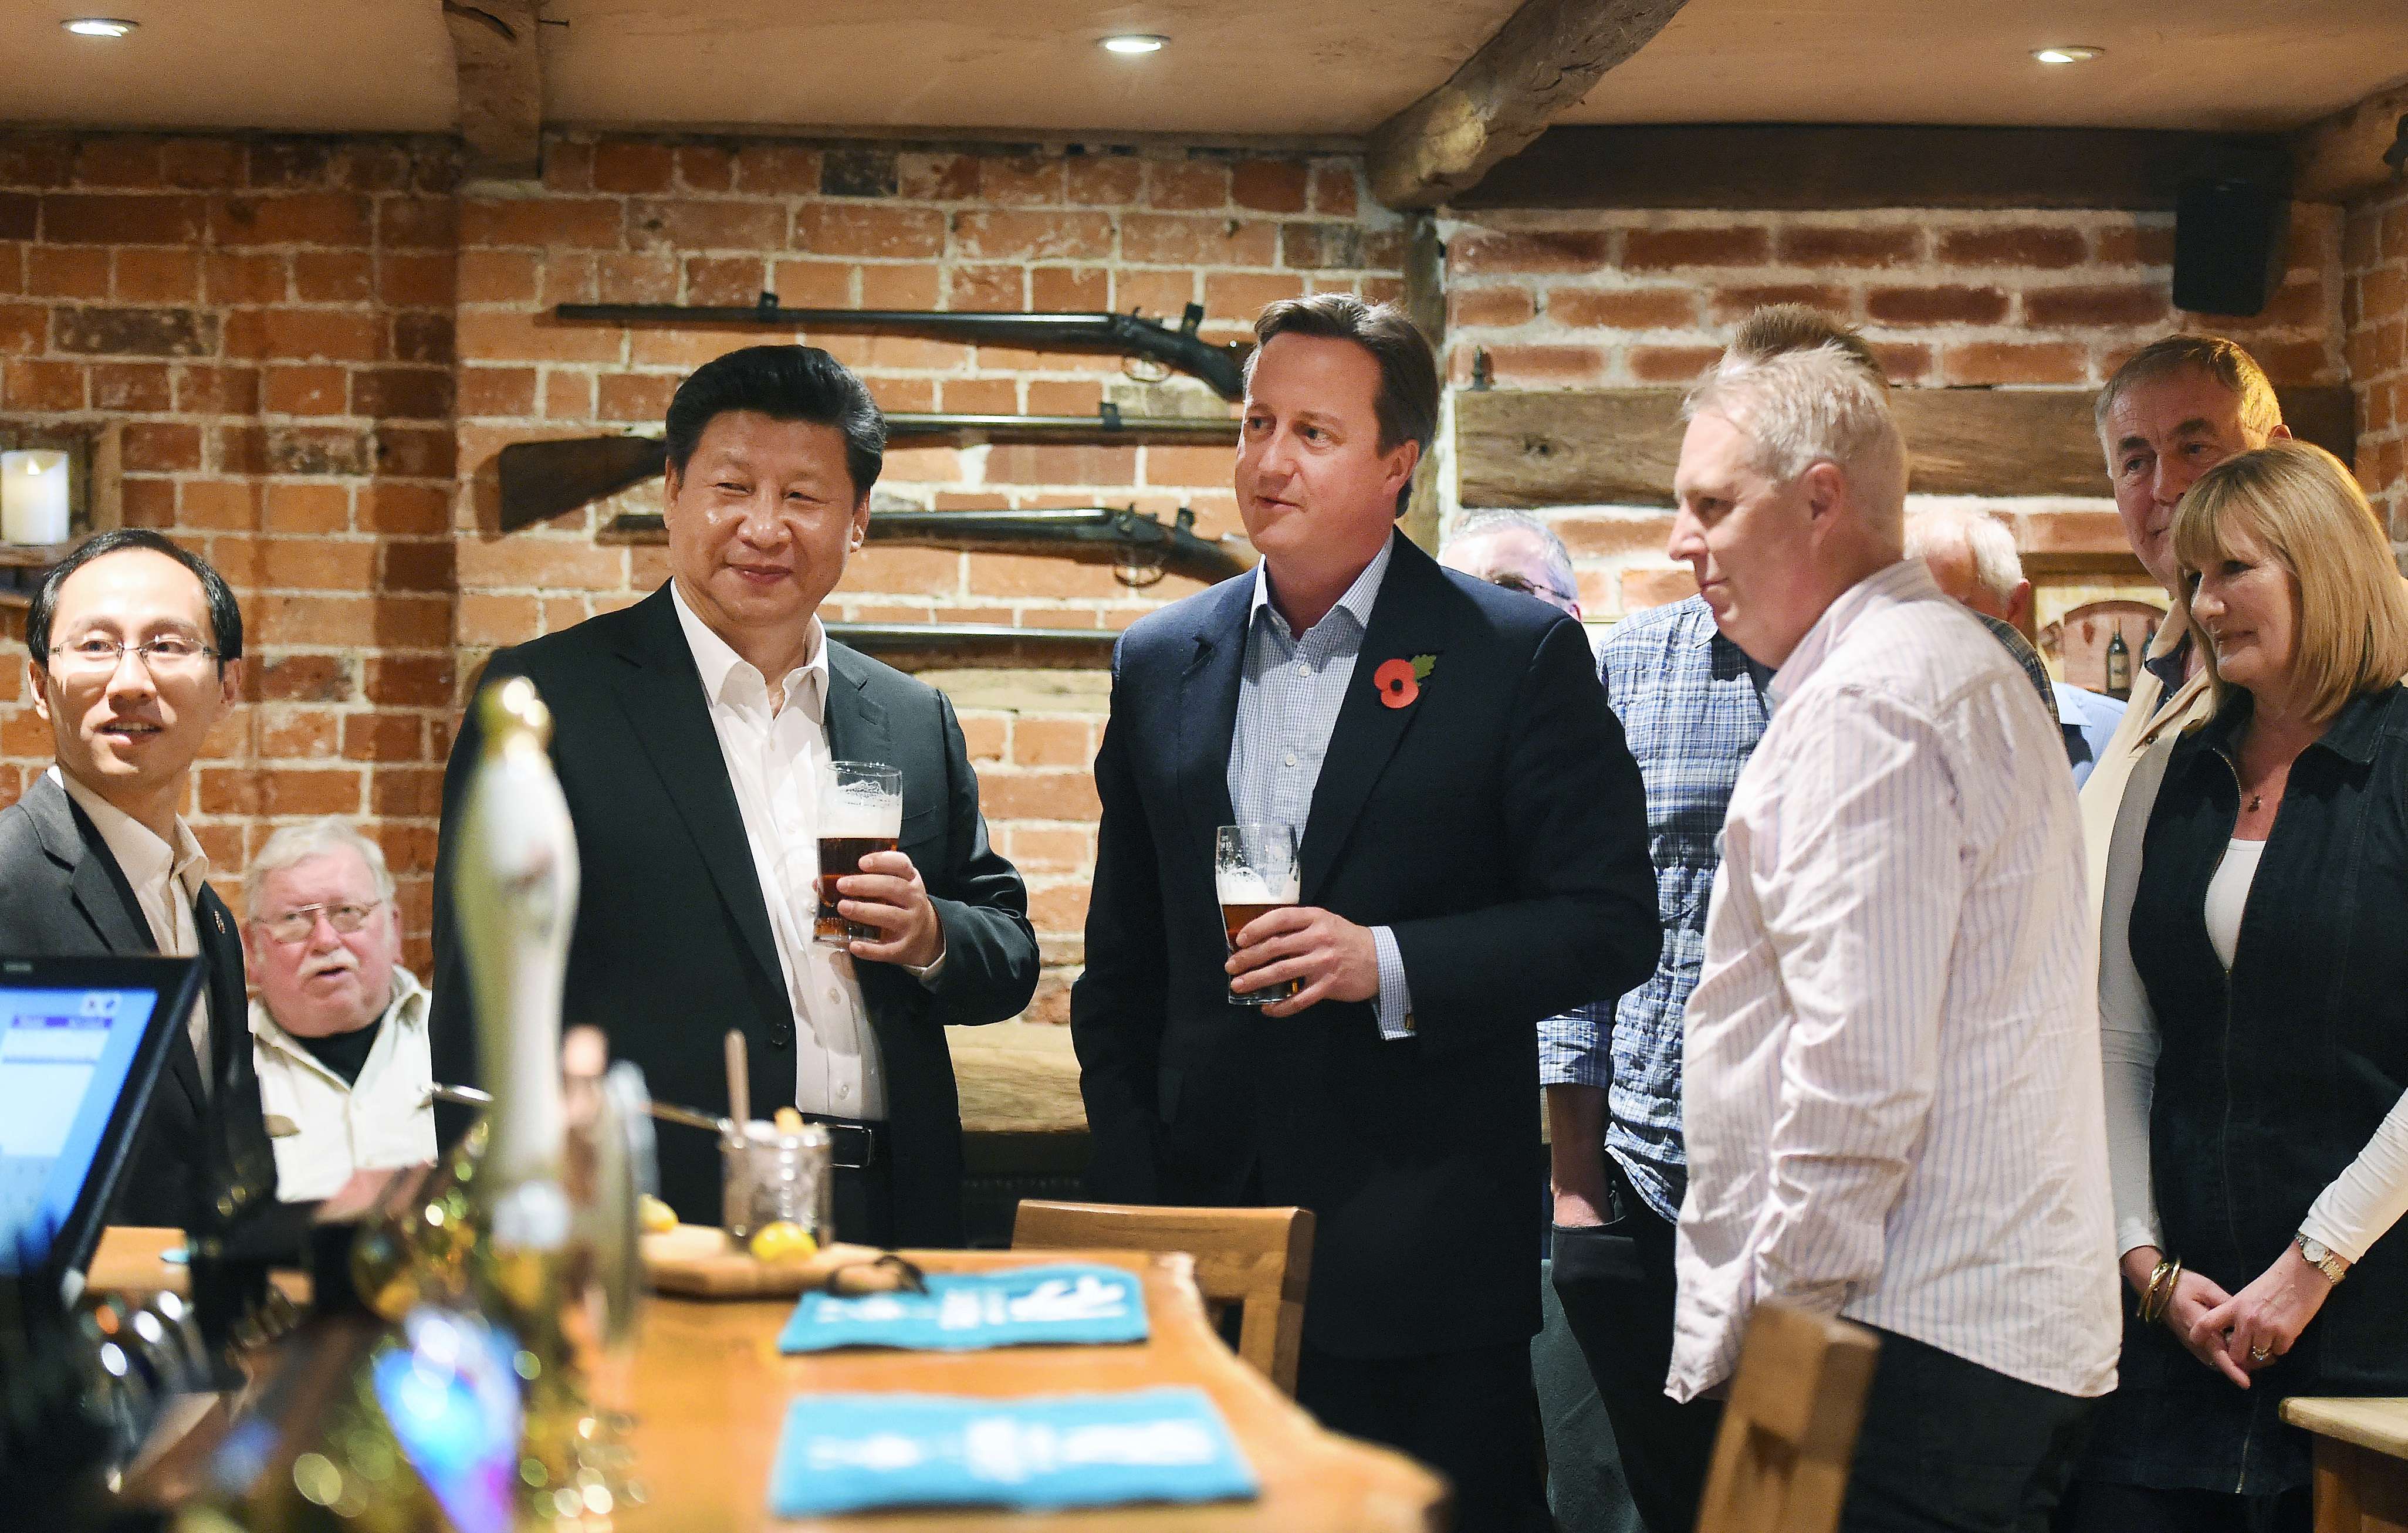 President Xi Jinping and then British prime minister David Cameron enjoy a pint at a country pub during Xi’s state visit to the UK in October, 2015. Photo: AFP